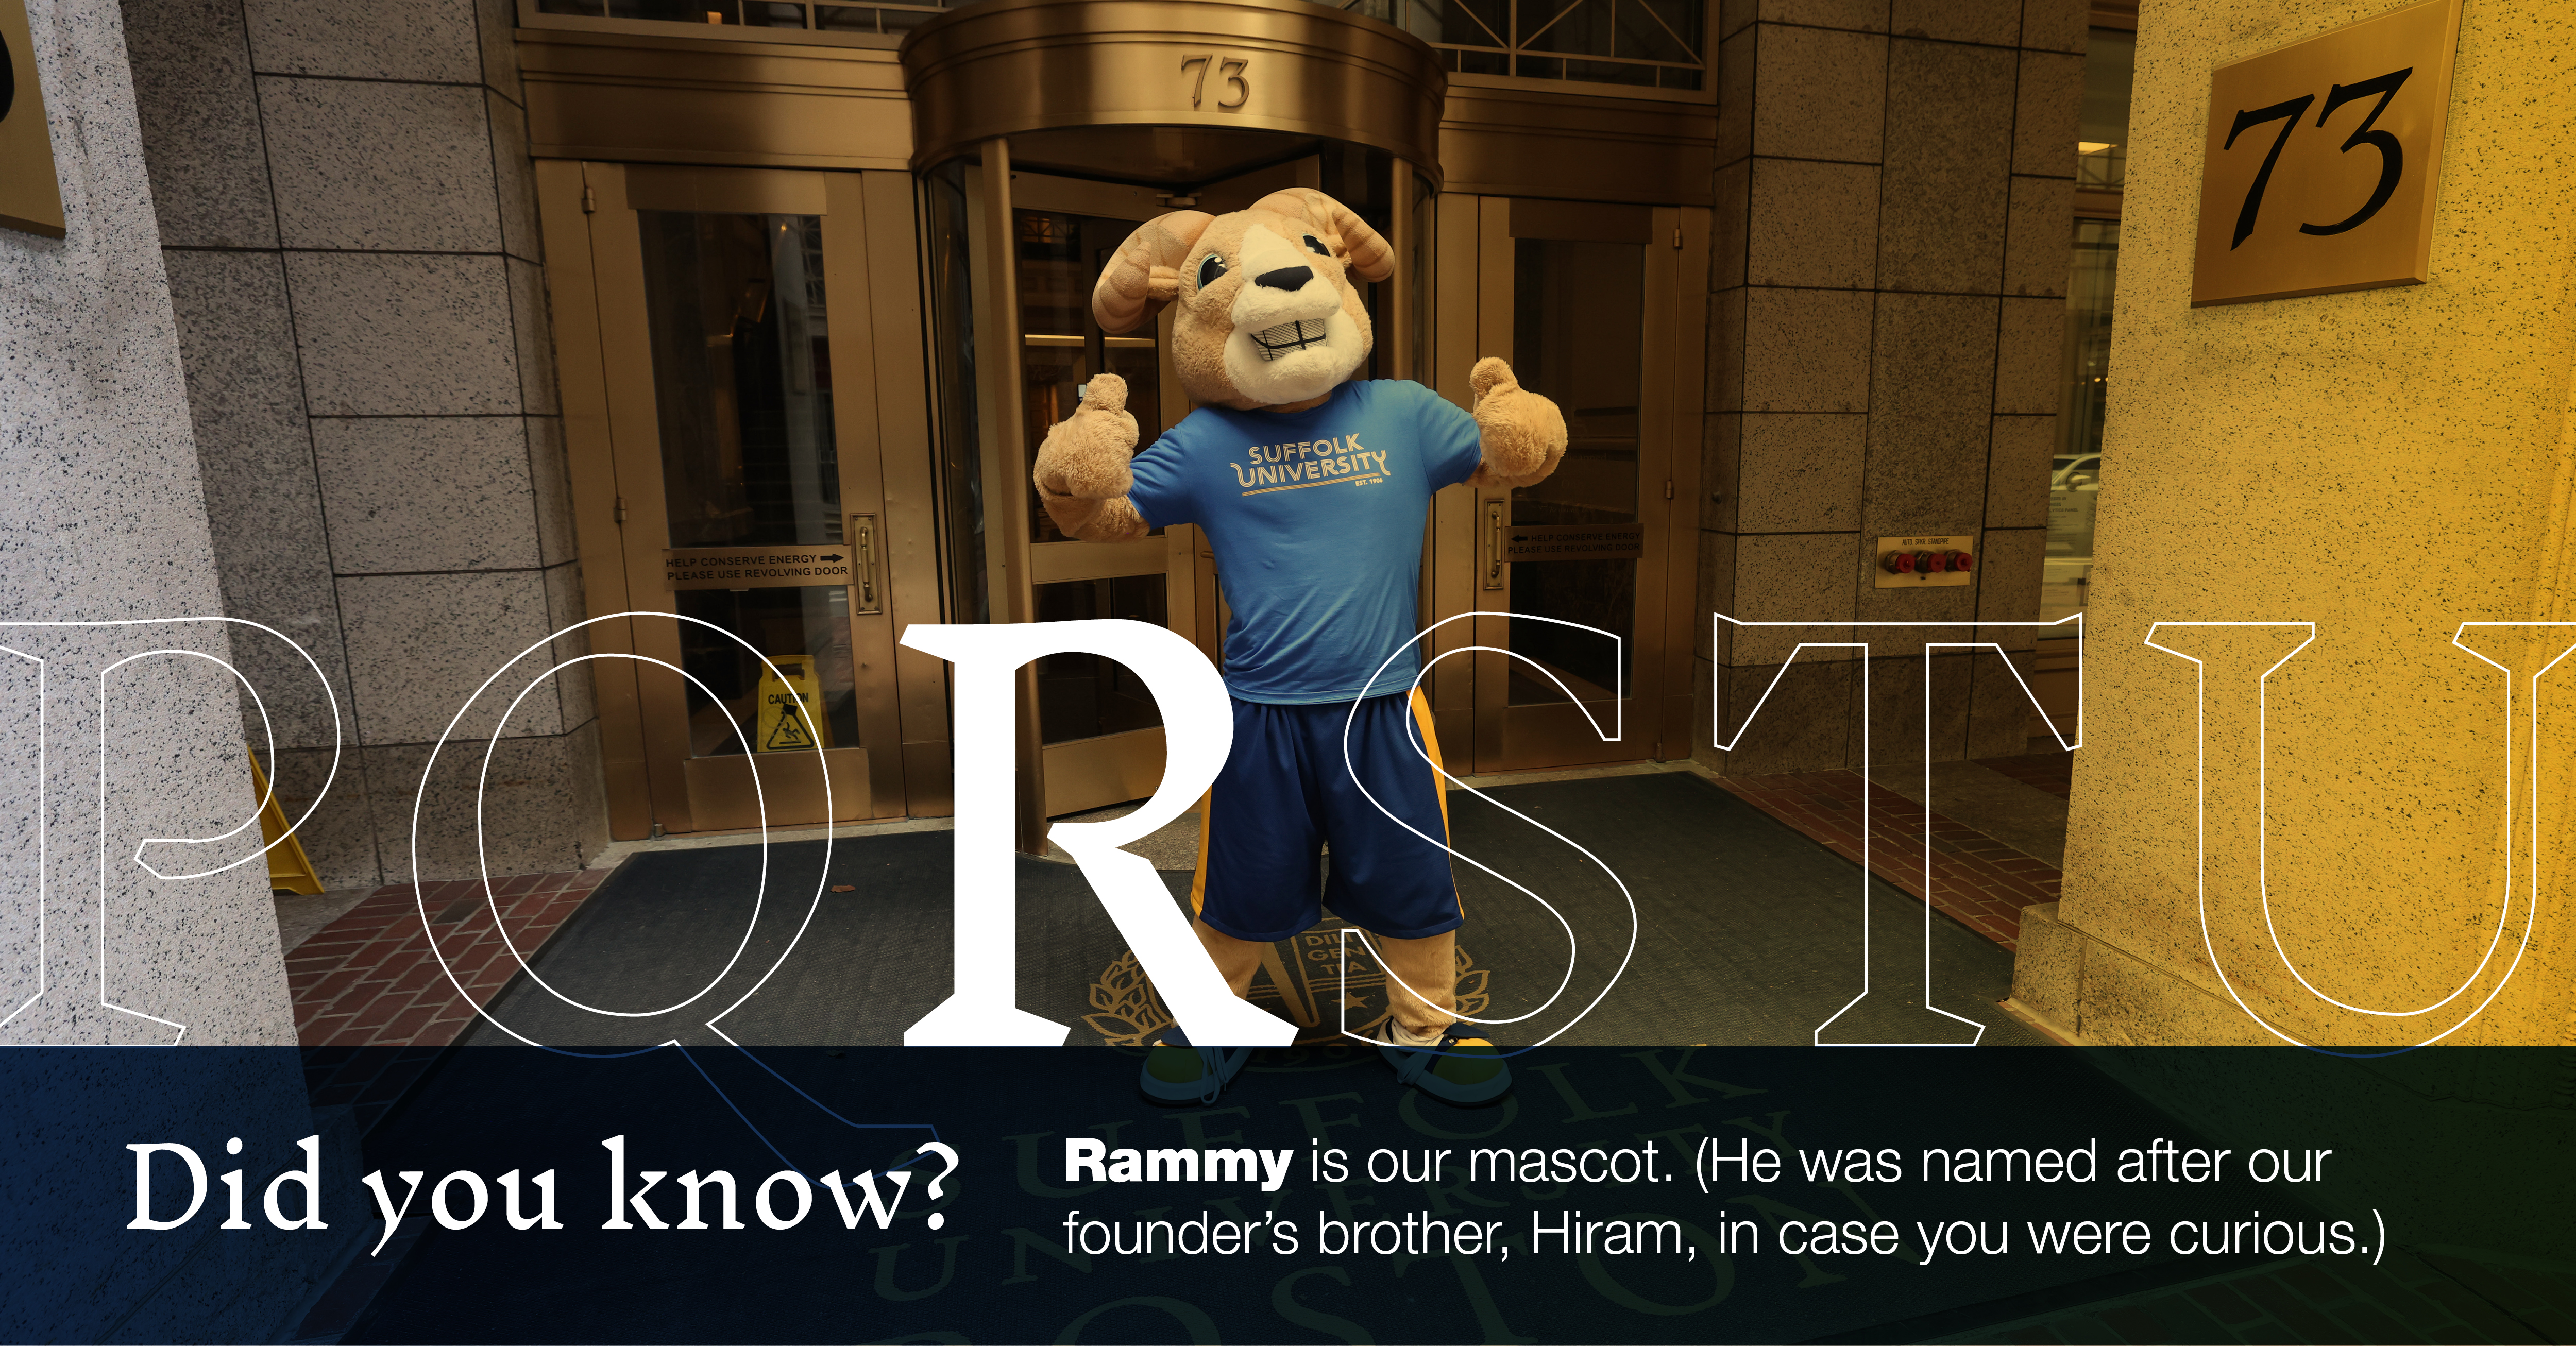 R: [image of Rammy in front of 73 Tremont] Did you know that Rammy is our mascot. (He was named after our founder's brother, Hiram, in case you were wondering.)